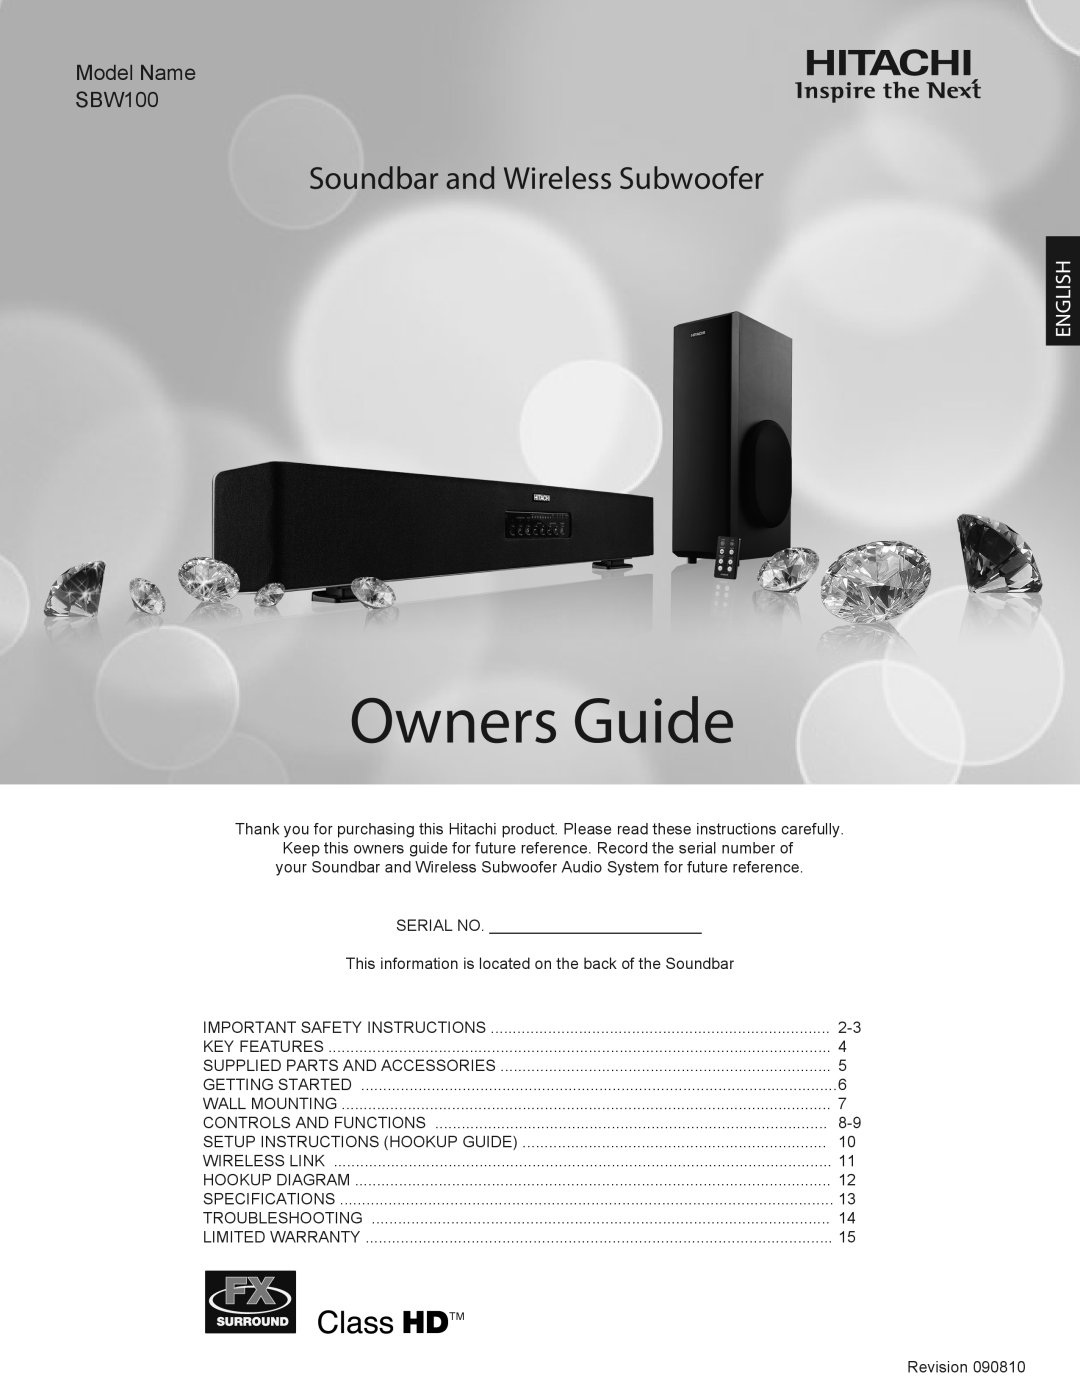 Hitachi important safety instructions Owners Guide, Soundbar and Wireless Subwoofer, Model Name SBW100, English 